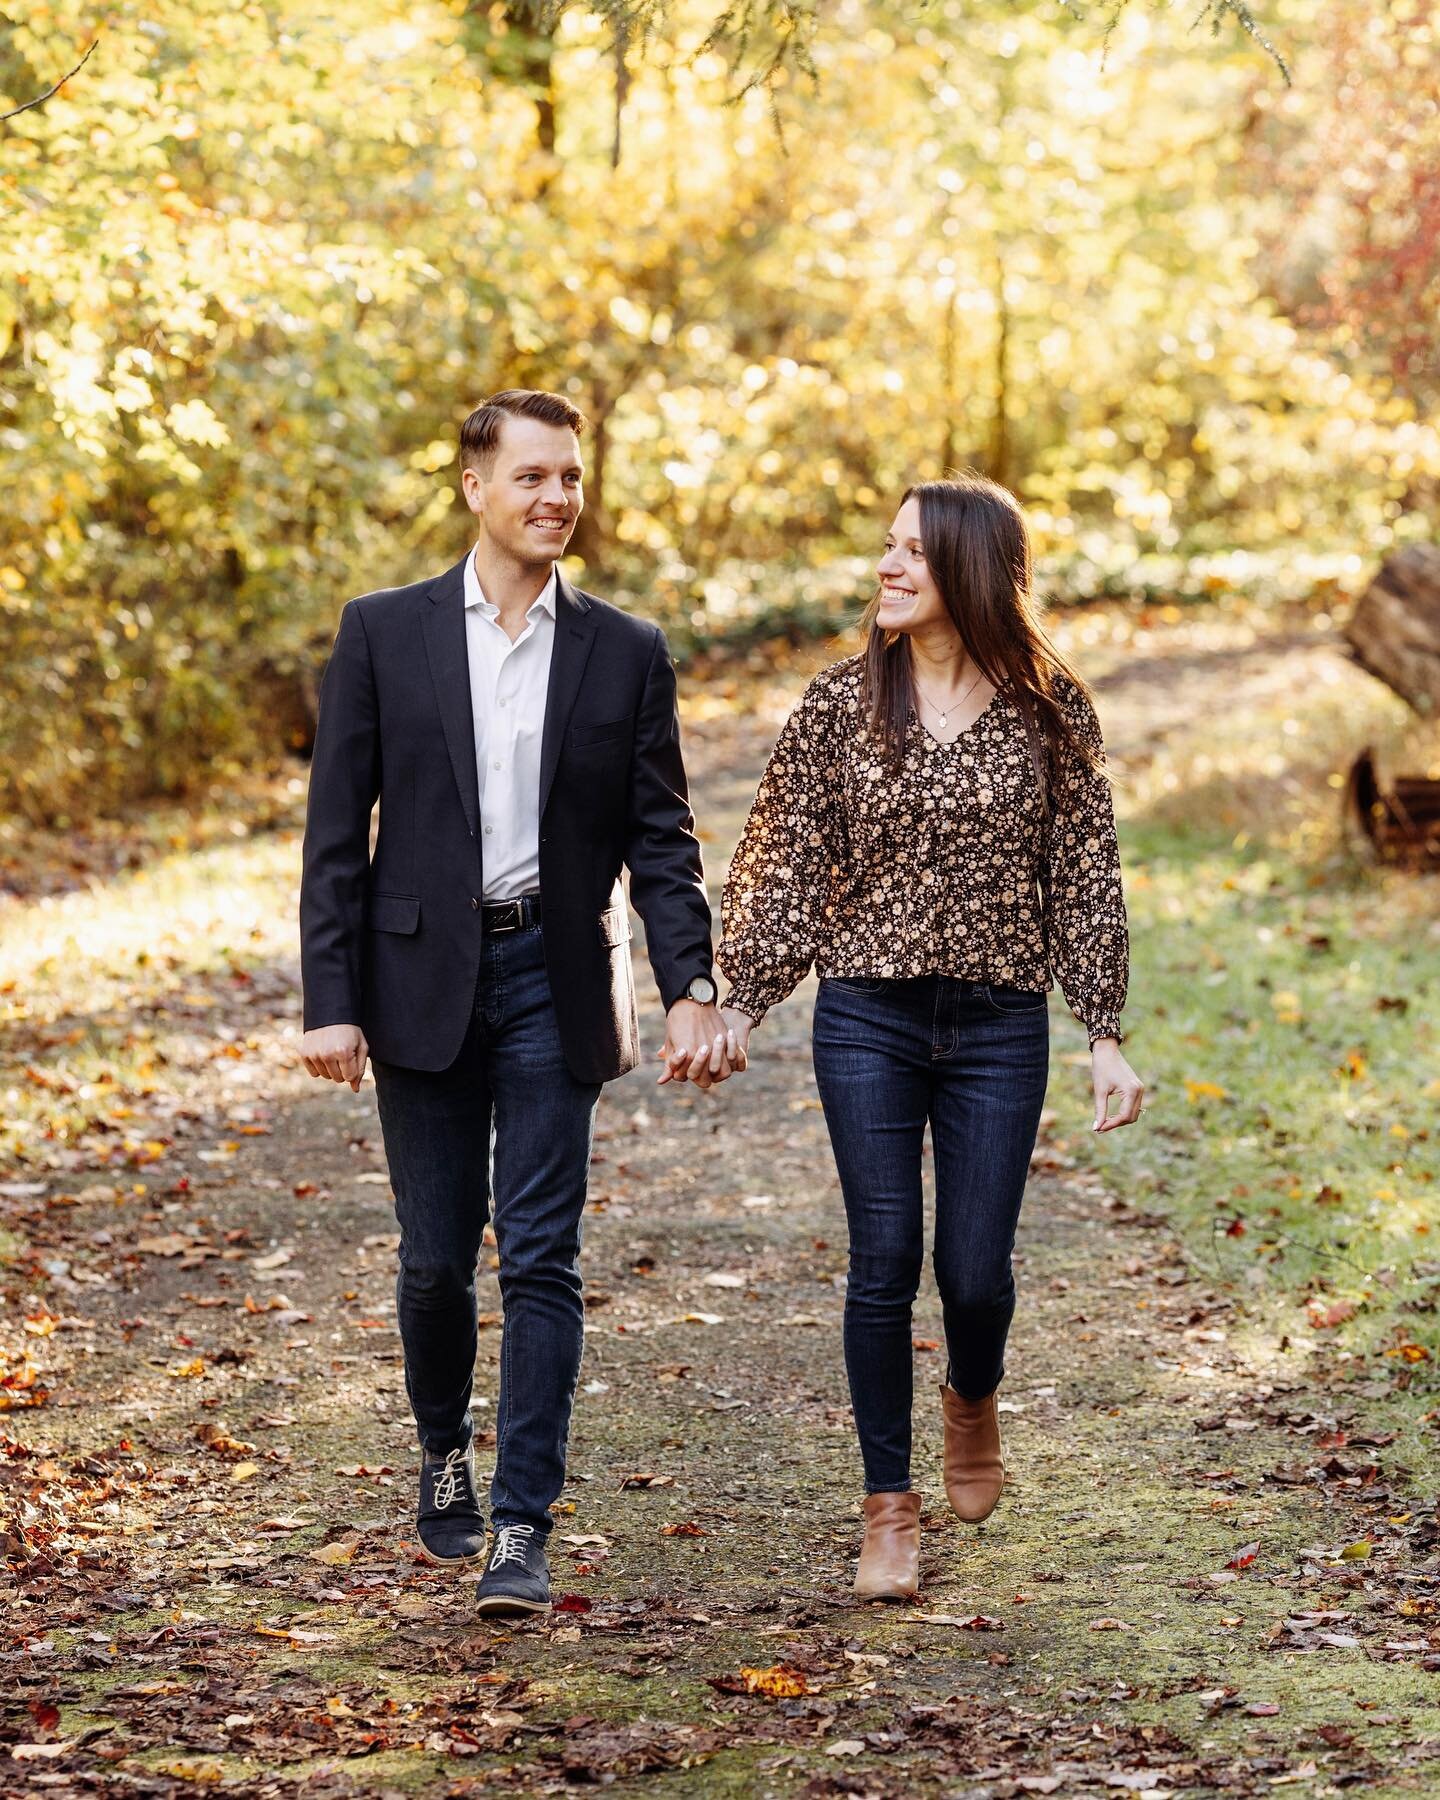 Somehow we&rsquo;ve already reached our last wedding weekend of the season (what is time??)!
Excited to celebrate these two stunners today 😍
.
.
.
#lovemedophoto #philawedding #philadelphiaweddingphotographer #intimatewedding #radlovestories #weddin